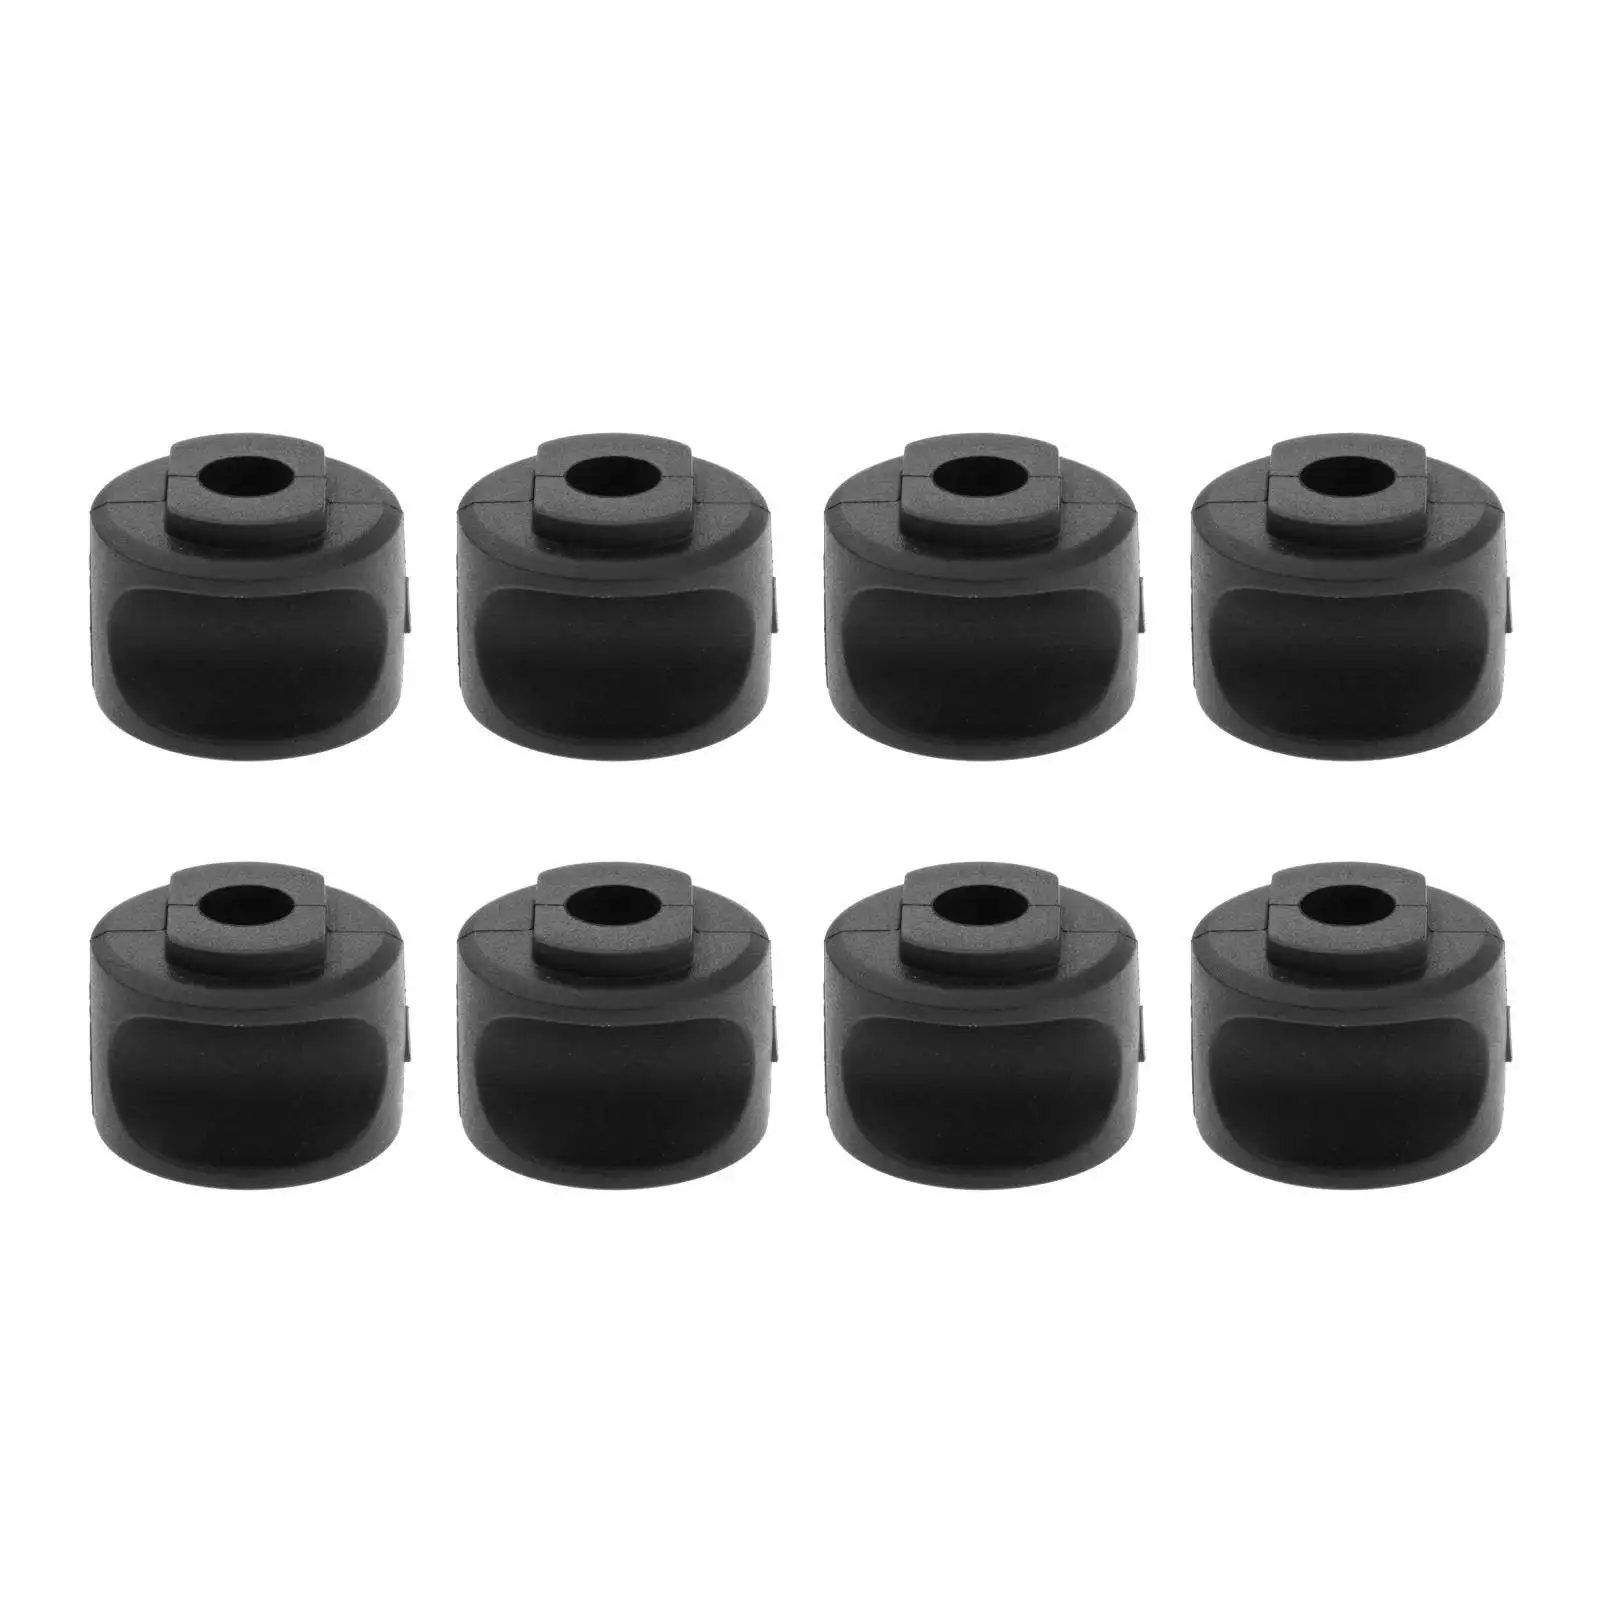 8 Pieces Rear Stabilizer Support Bushing 5432598 for Polaris 1997-2005 Sportsman 500